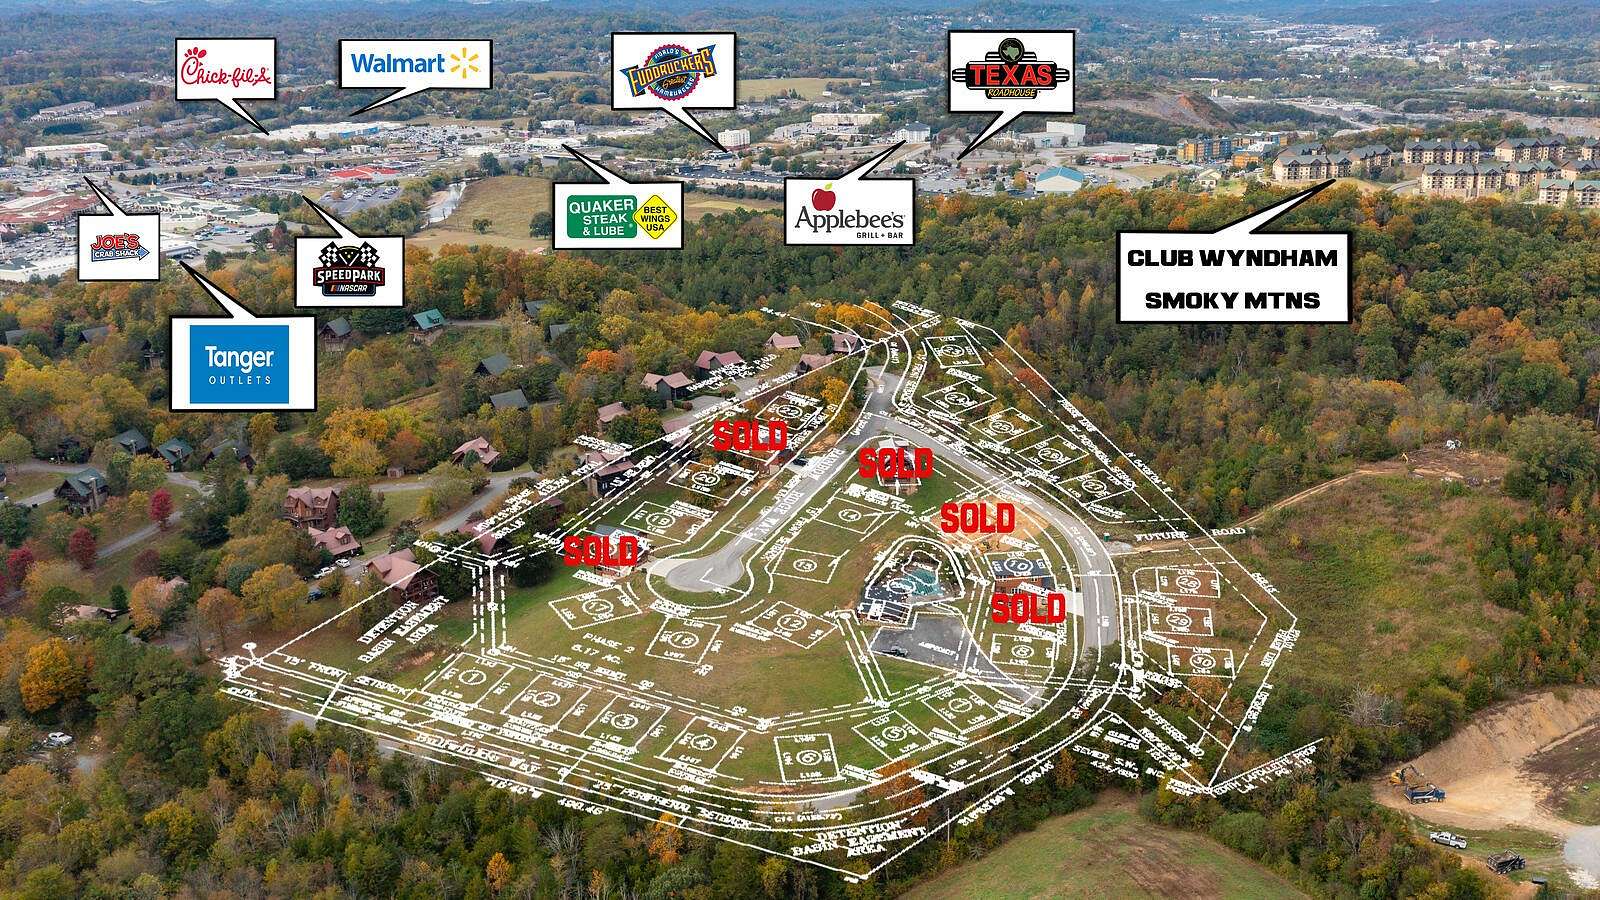 0.24 Acres of Residential Land for Sale in Pigeon Forge, Tennessee